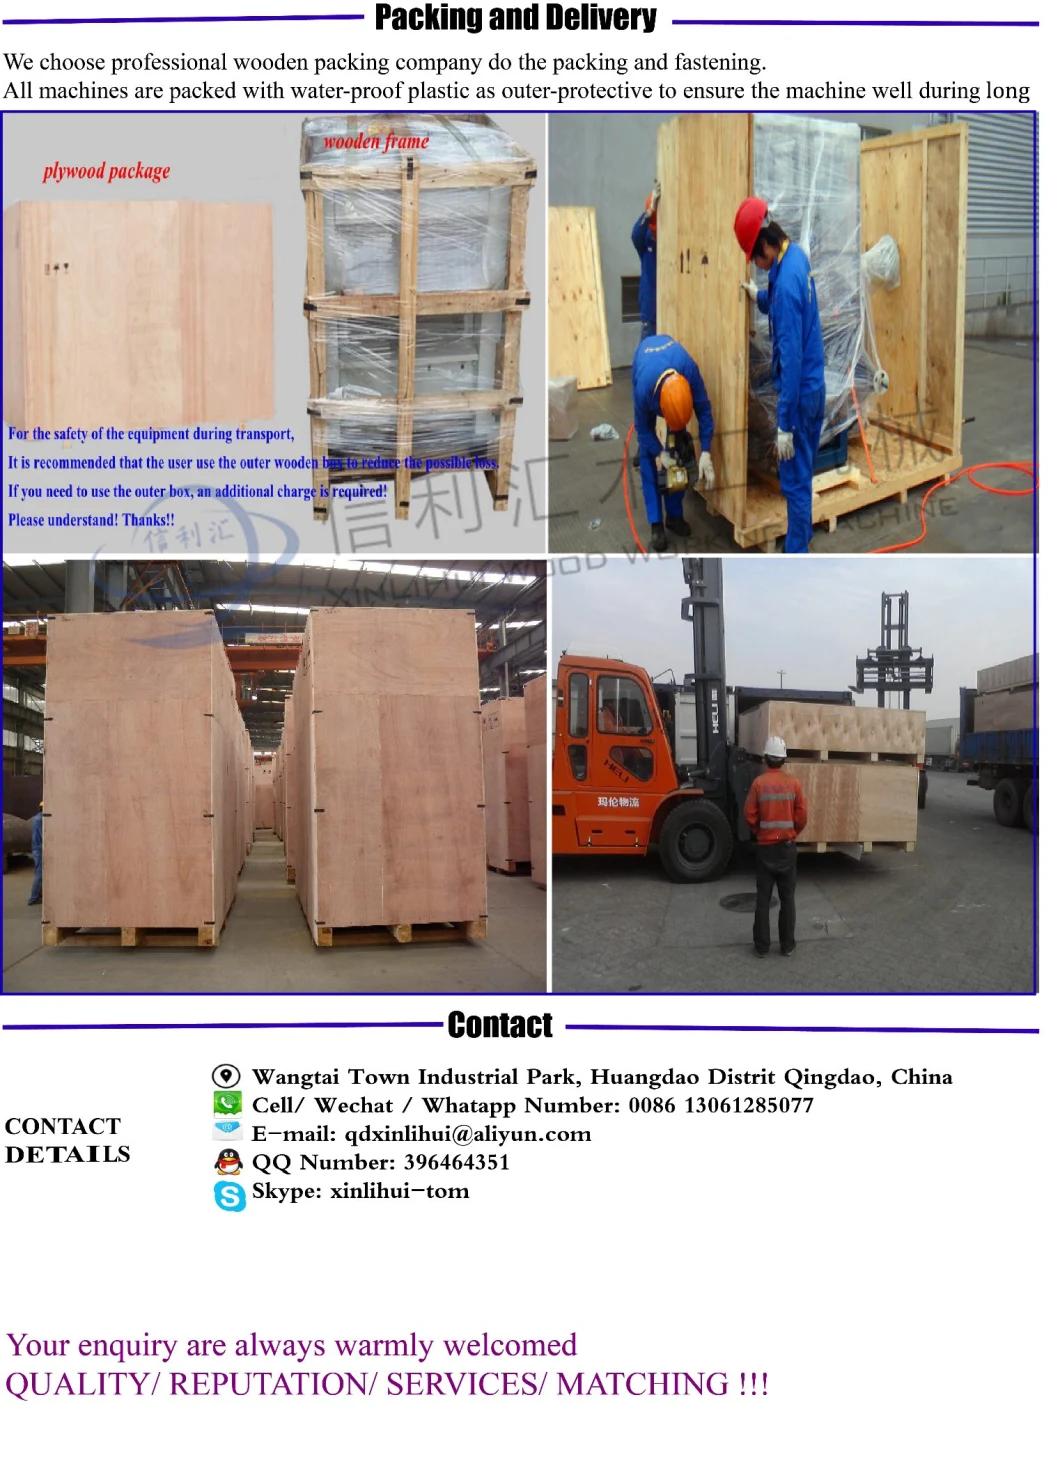 Xinlihui Brand 800 Ton 10 Layer Film Faced Hot Press with Ce/ Three/ Five/ Eight Layers160 Tons Wooden Door/ Joinery Board Hot Press Machinery